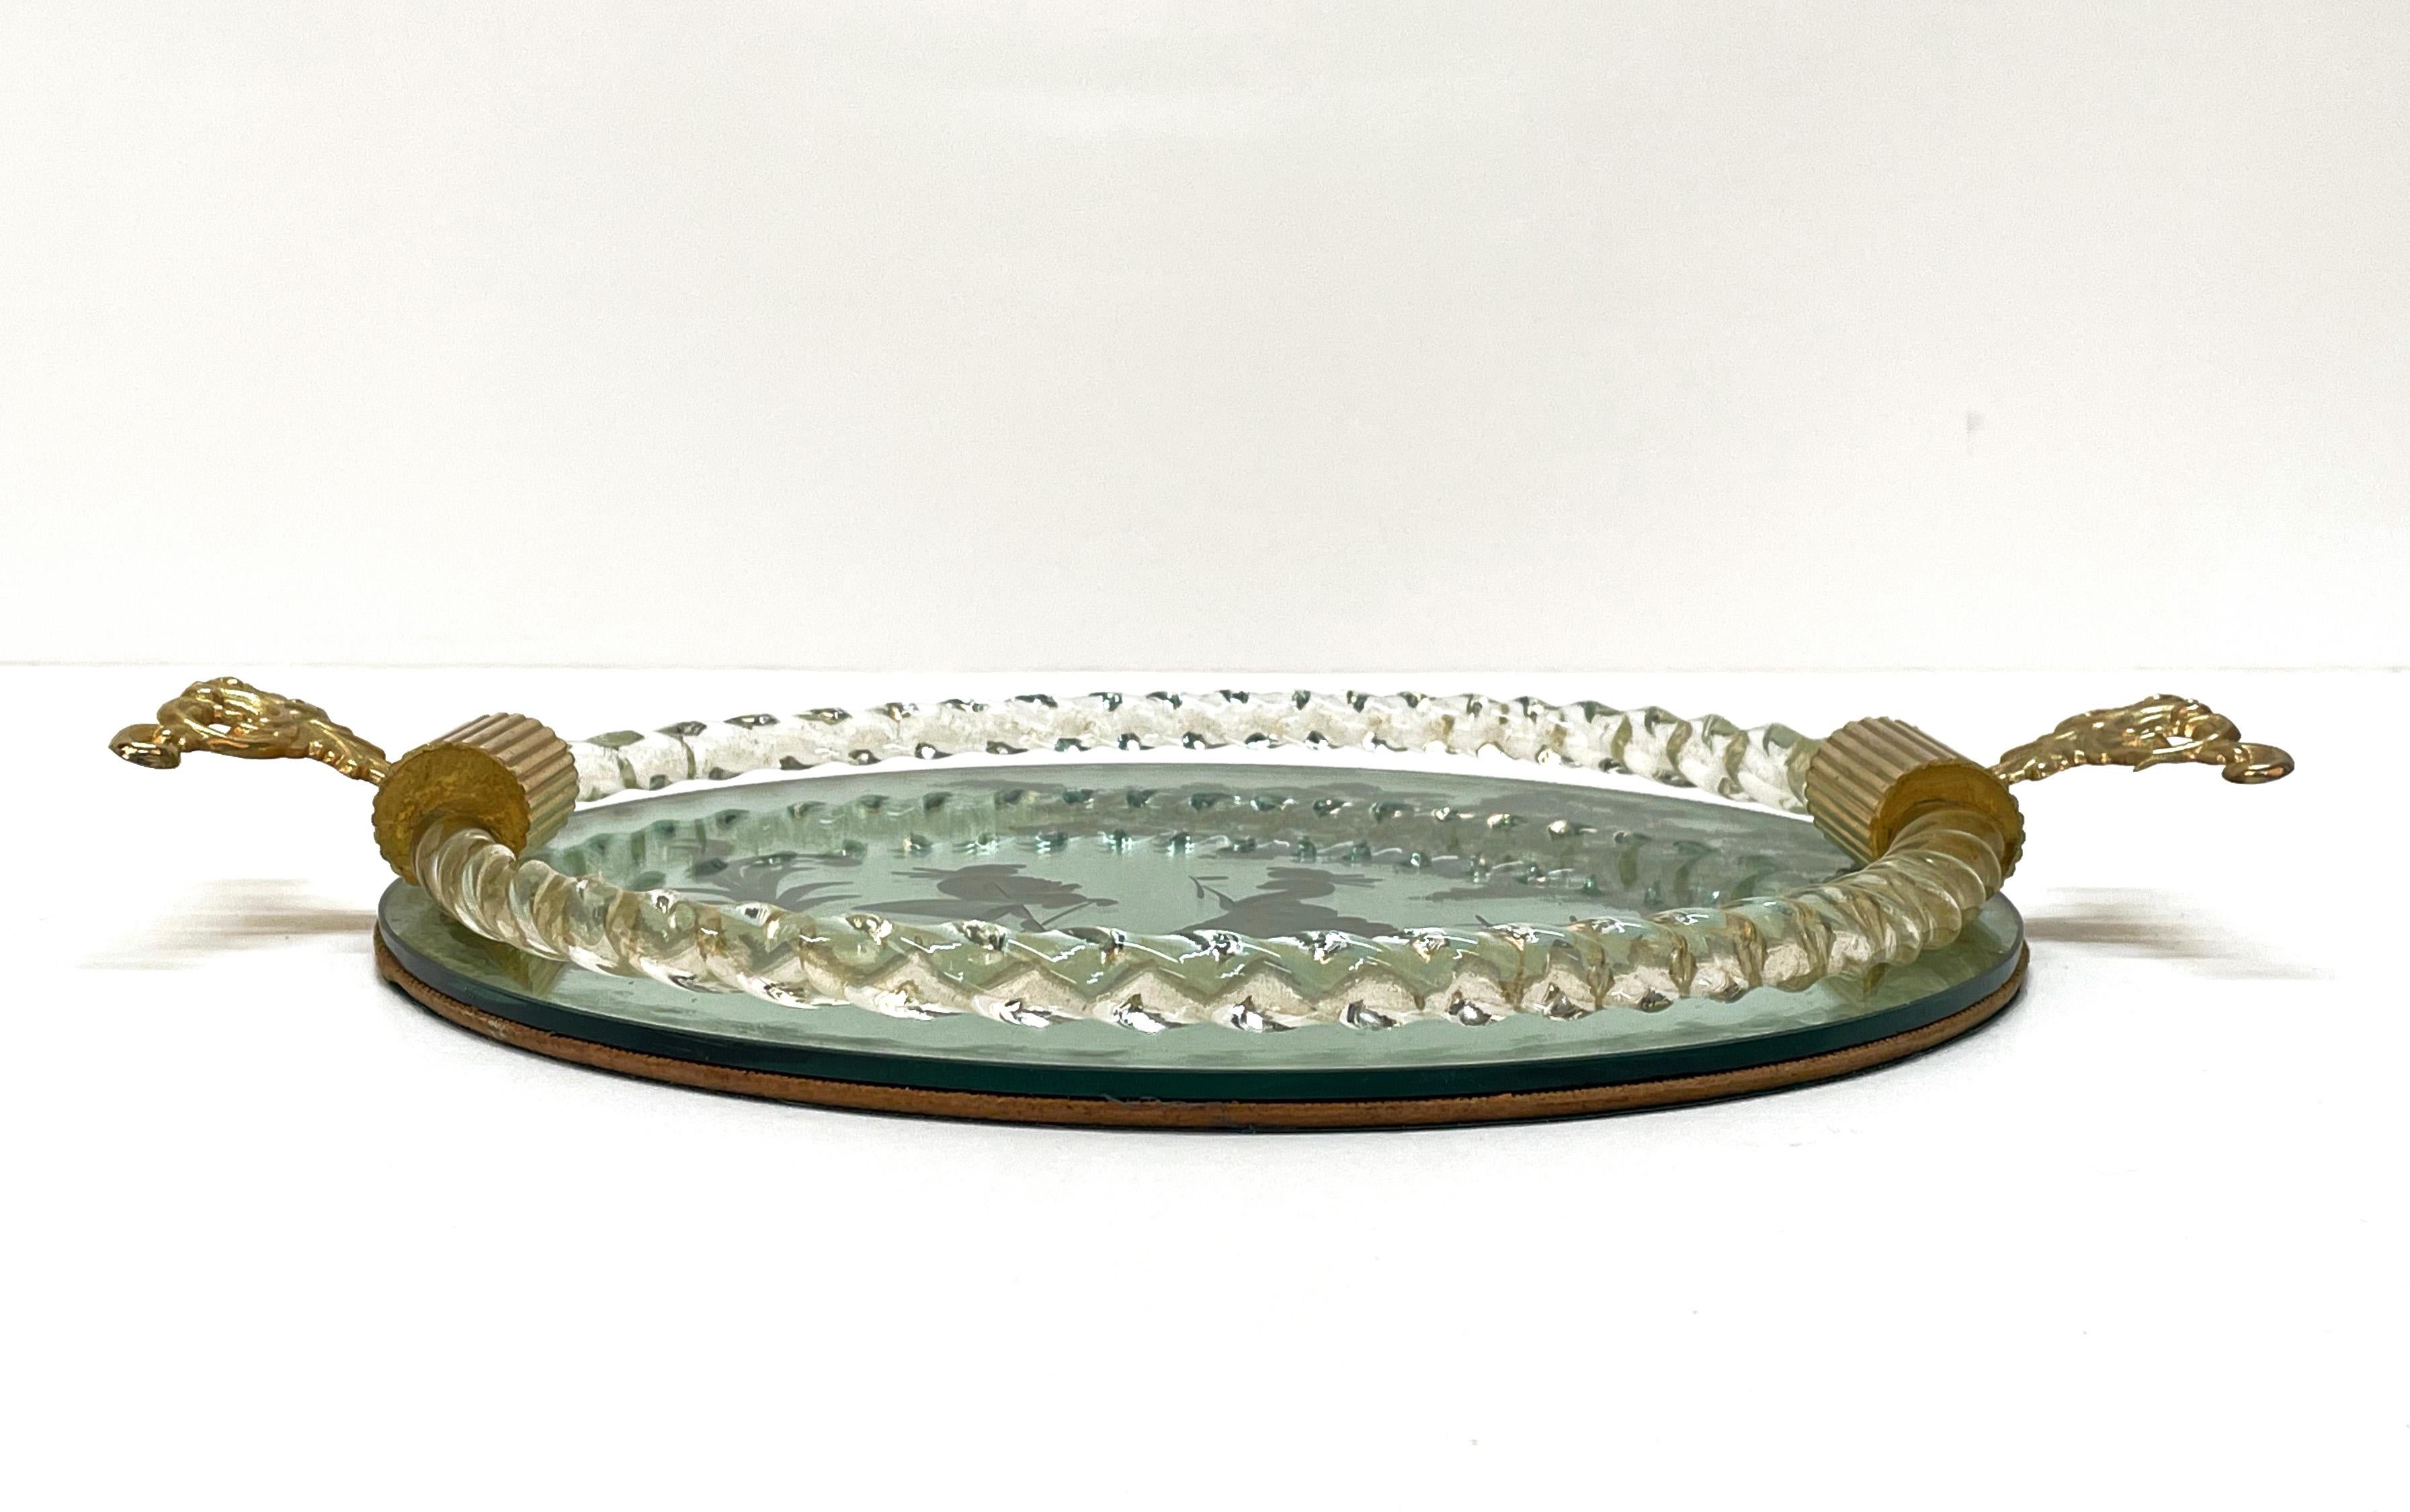 Ercole Barovier Mirror-Engraved Murano Glass Italian Serving Tray, 1940s For Sale 1